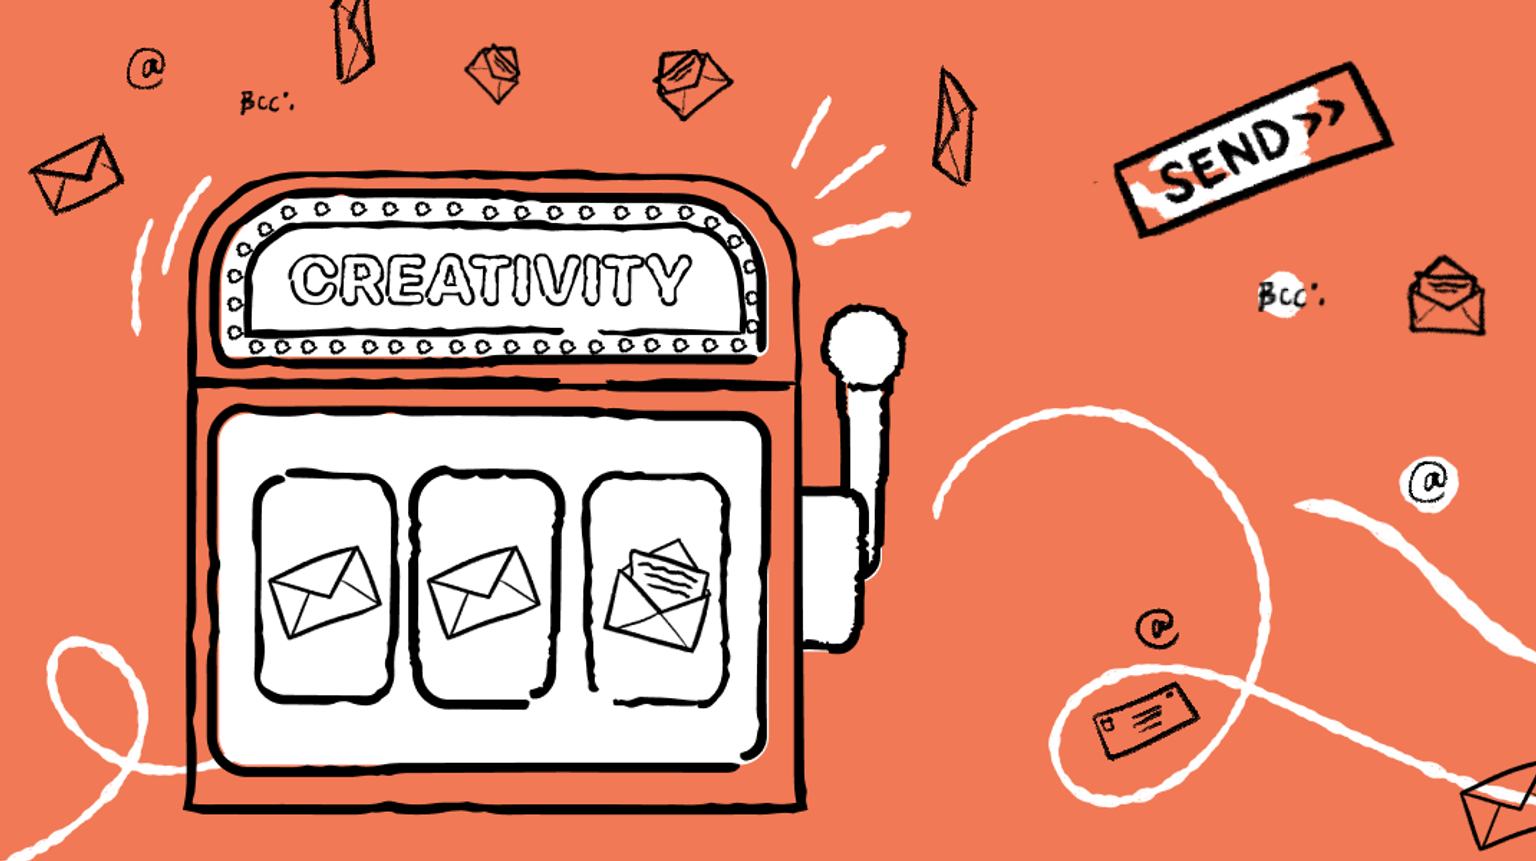 How creativity can help you win the email jackpot